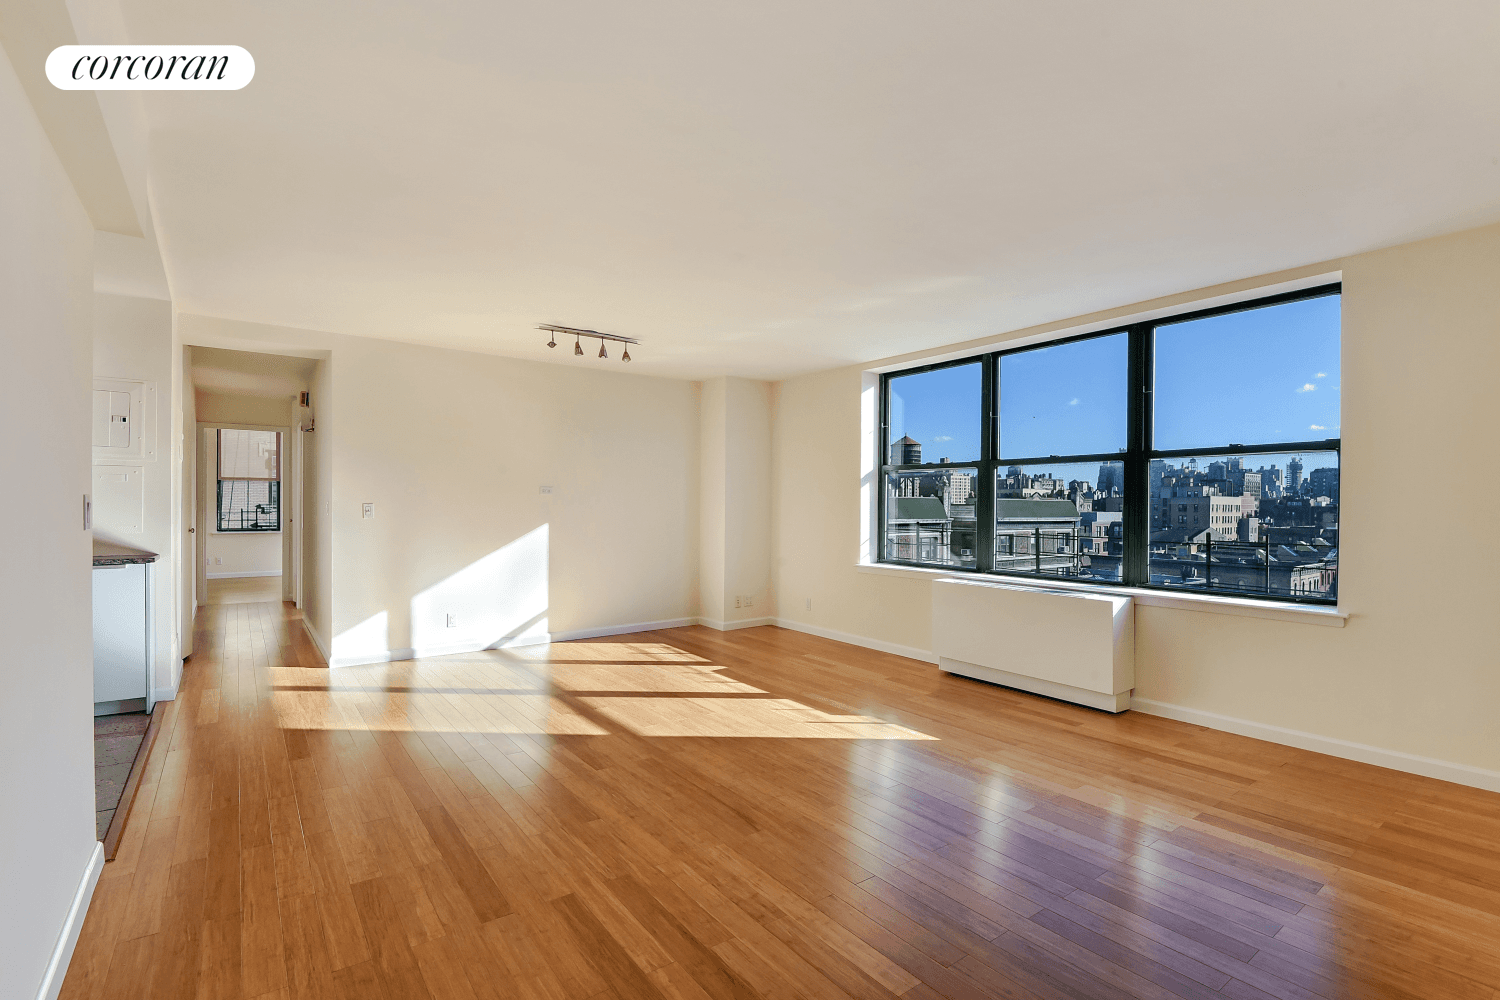 Bright, gorgeous and renovated, this spacious, light filled 2 bedroom, 2 bathroom apartment on a high floor has beautiful open Eastern city views from every window.